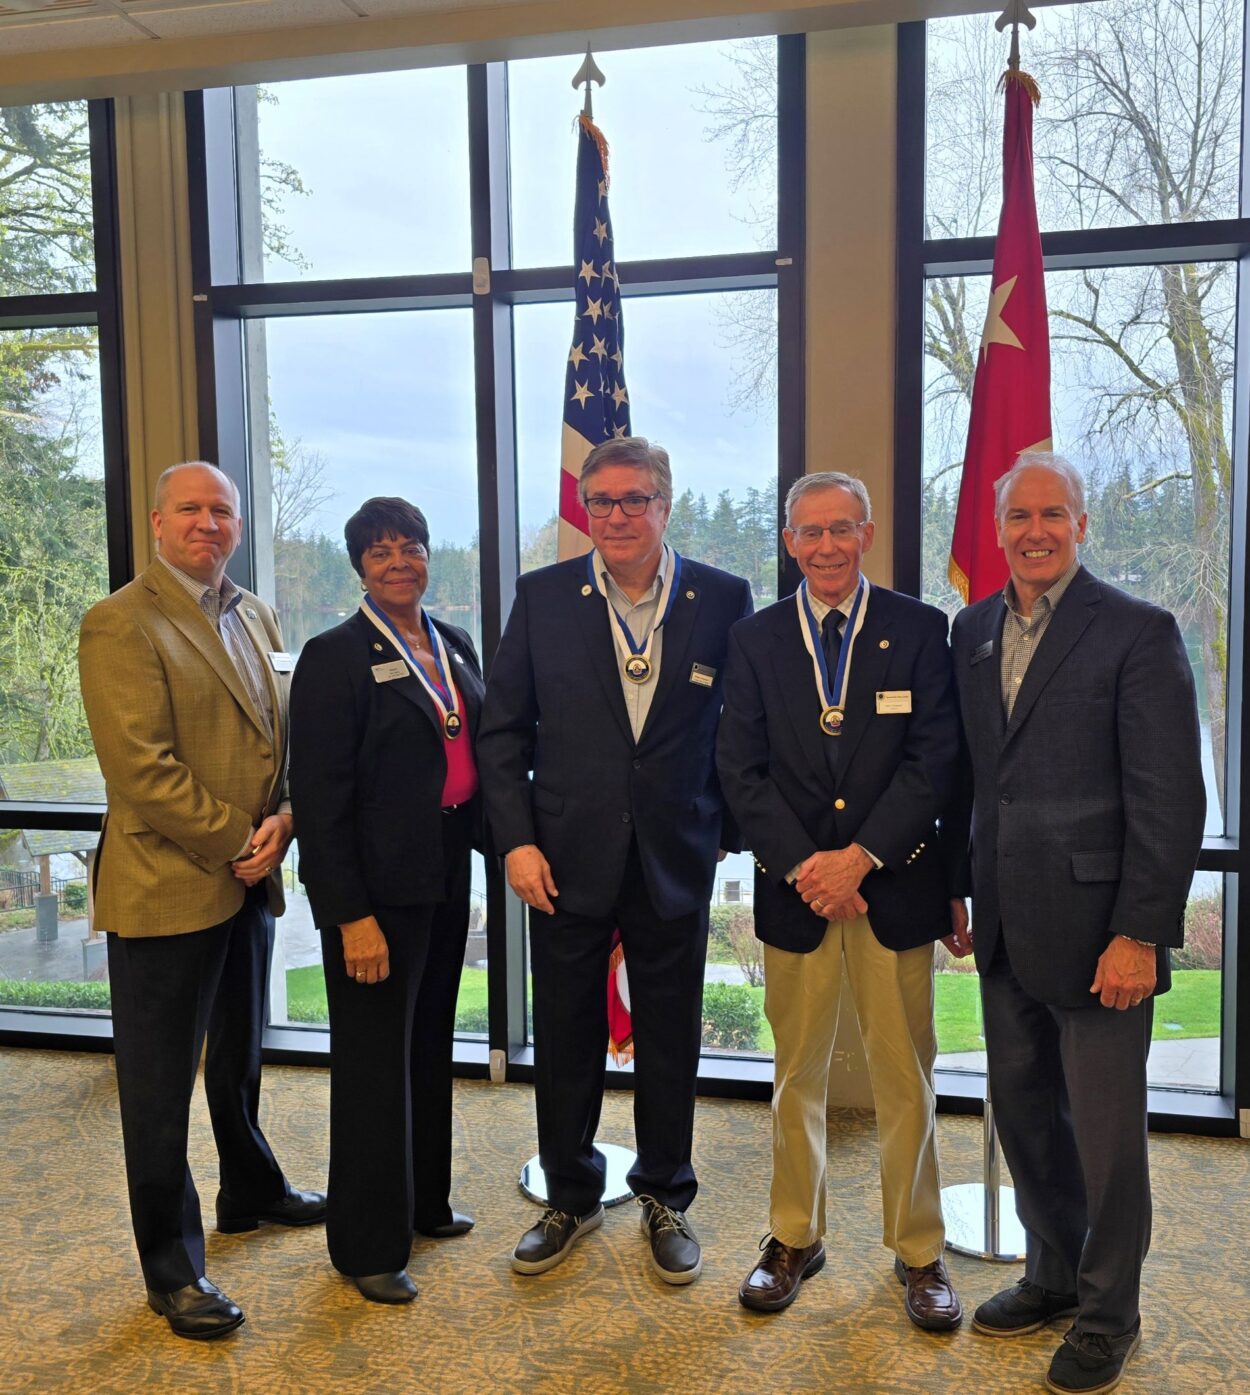 From left to right: Lakewood City Manager John Caulfield, Lakewood Deputy Mayor Mary Moss, South Sound Military and Communities Partnership Director Bill Adamson, former Lakewood City Councilmember John Simpson and Lakewood Mayor Jason Whalen